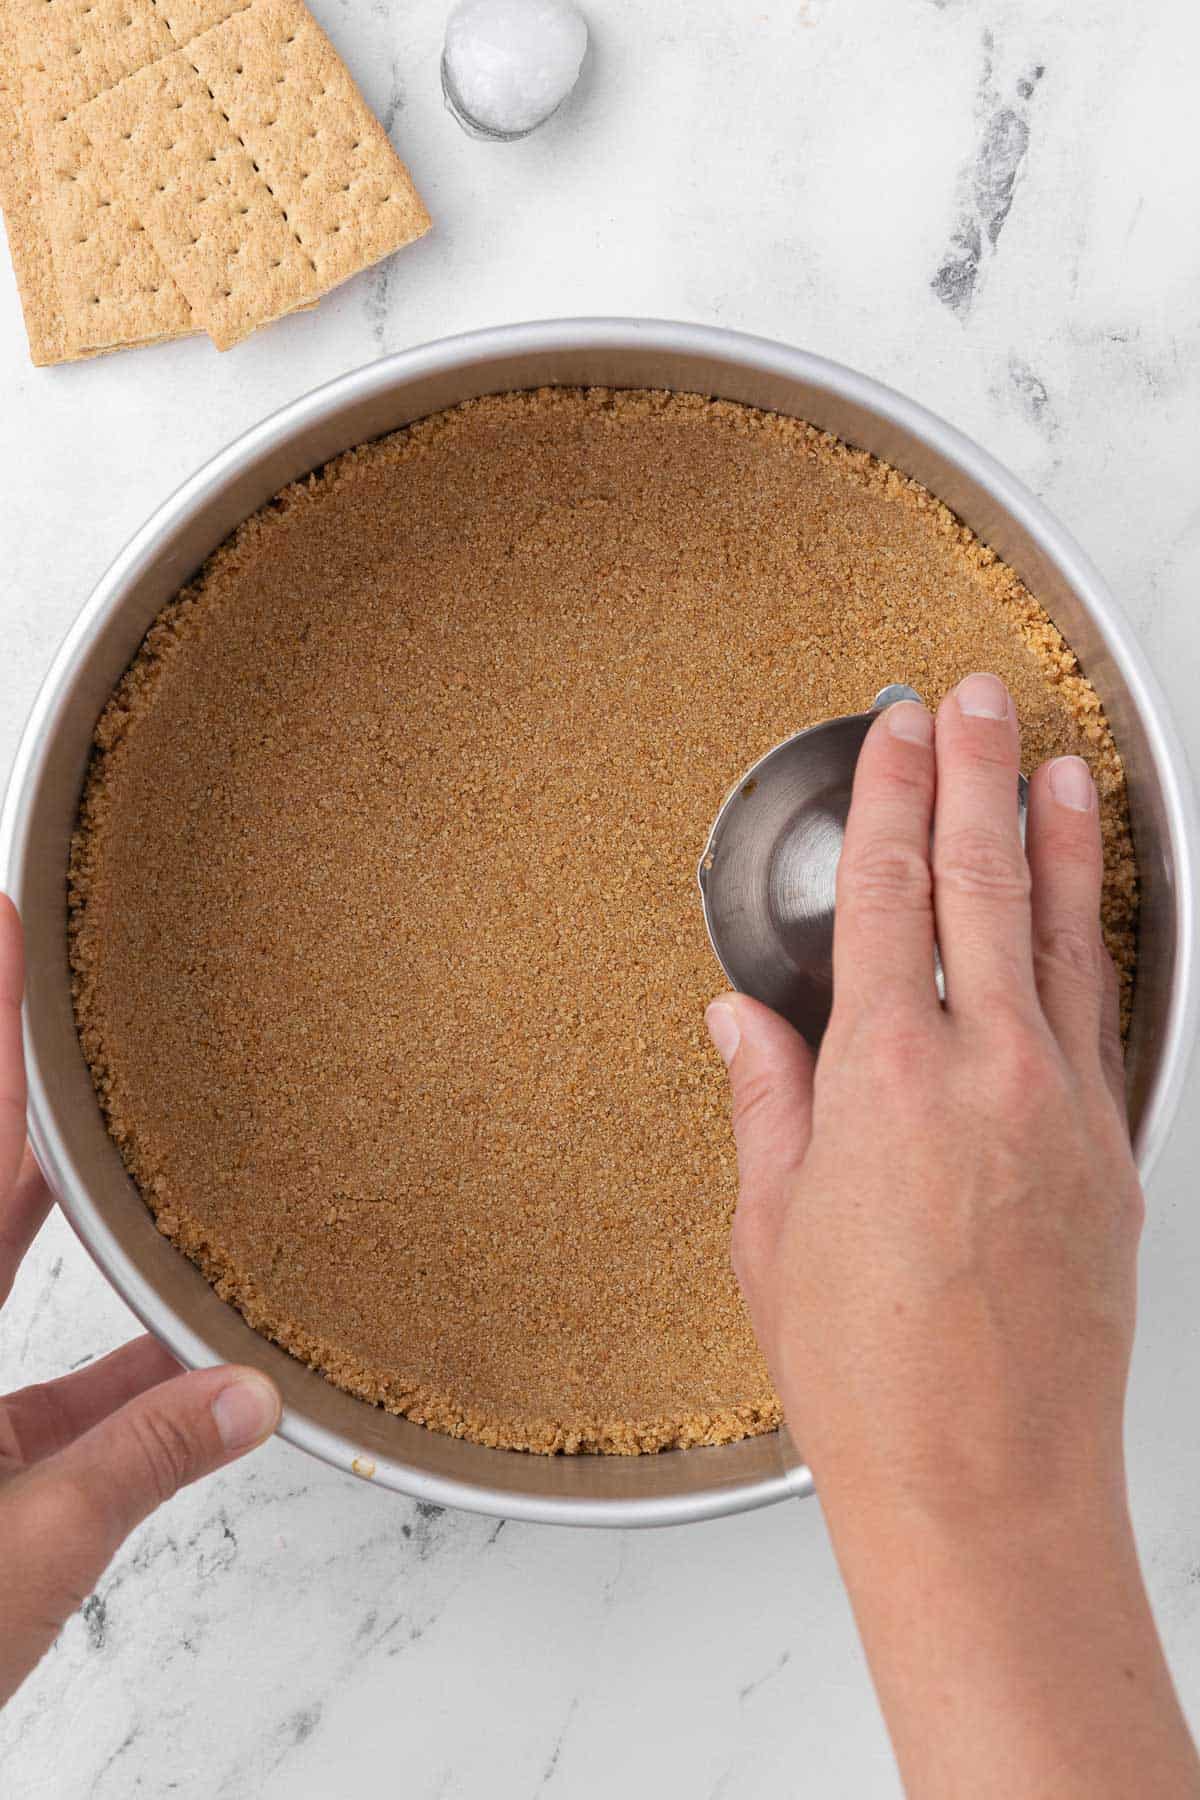 How to make a coconut oil graham cracker crust in a springform pan.